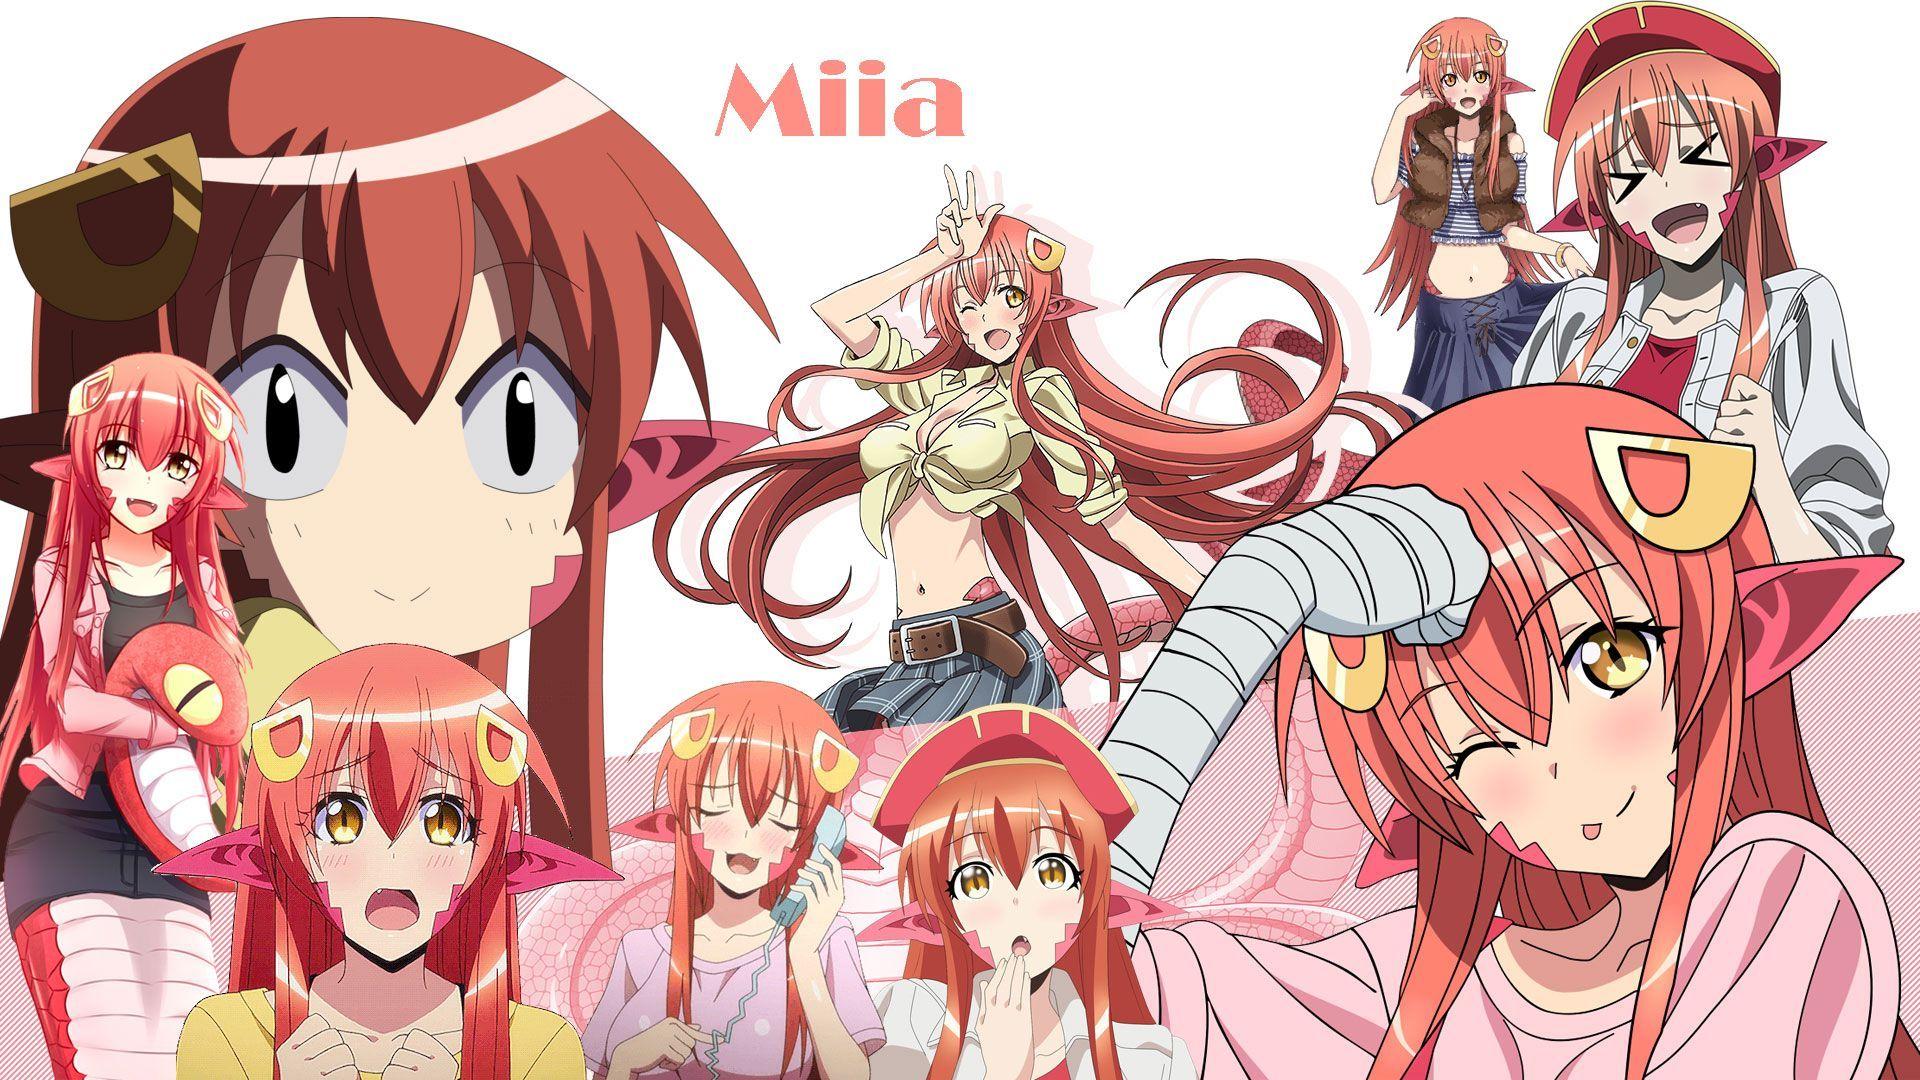 Monster Musume Wallpapers Top Free Monster Musume Backgrounds Images, Photos, Reviews